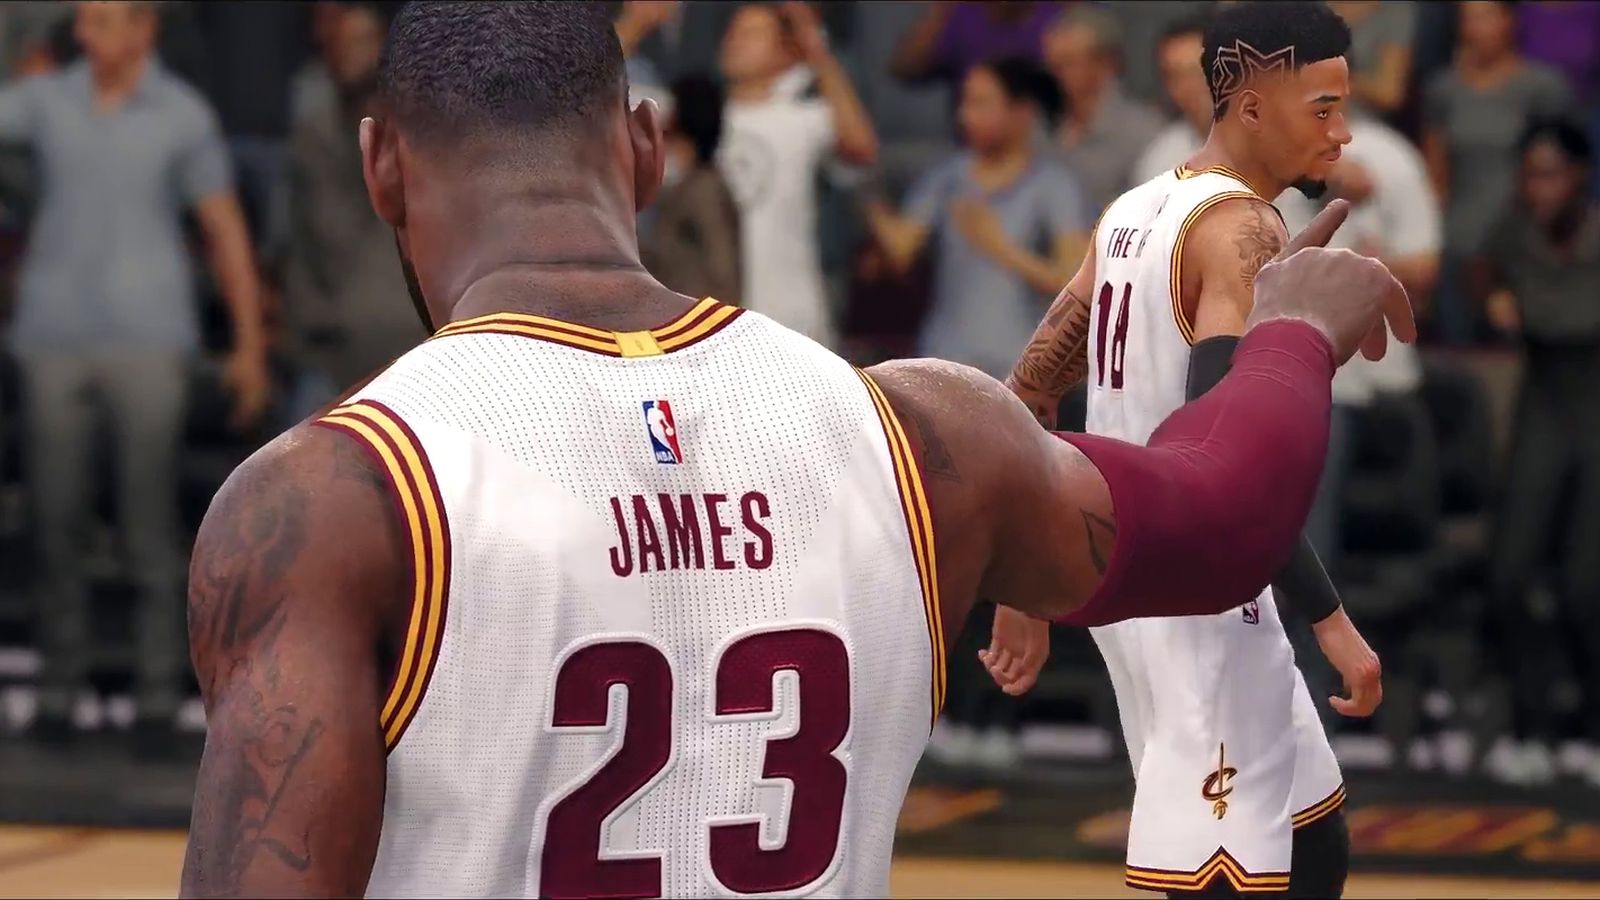 Nba Live Gets New Career Mode With League And Street